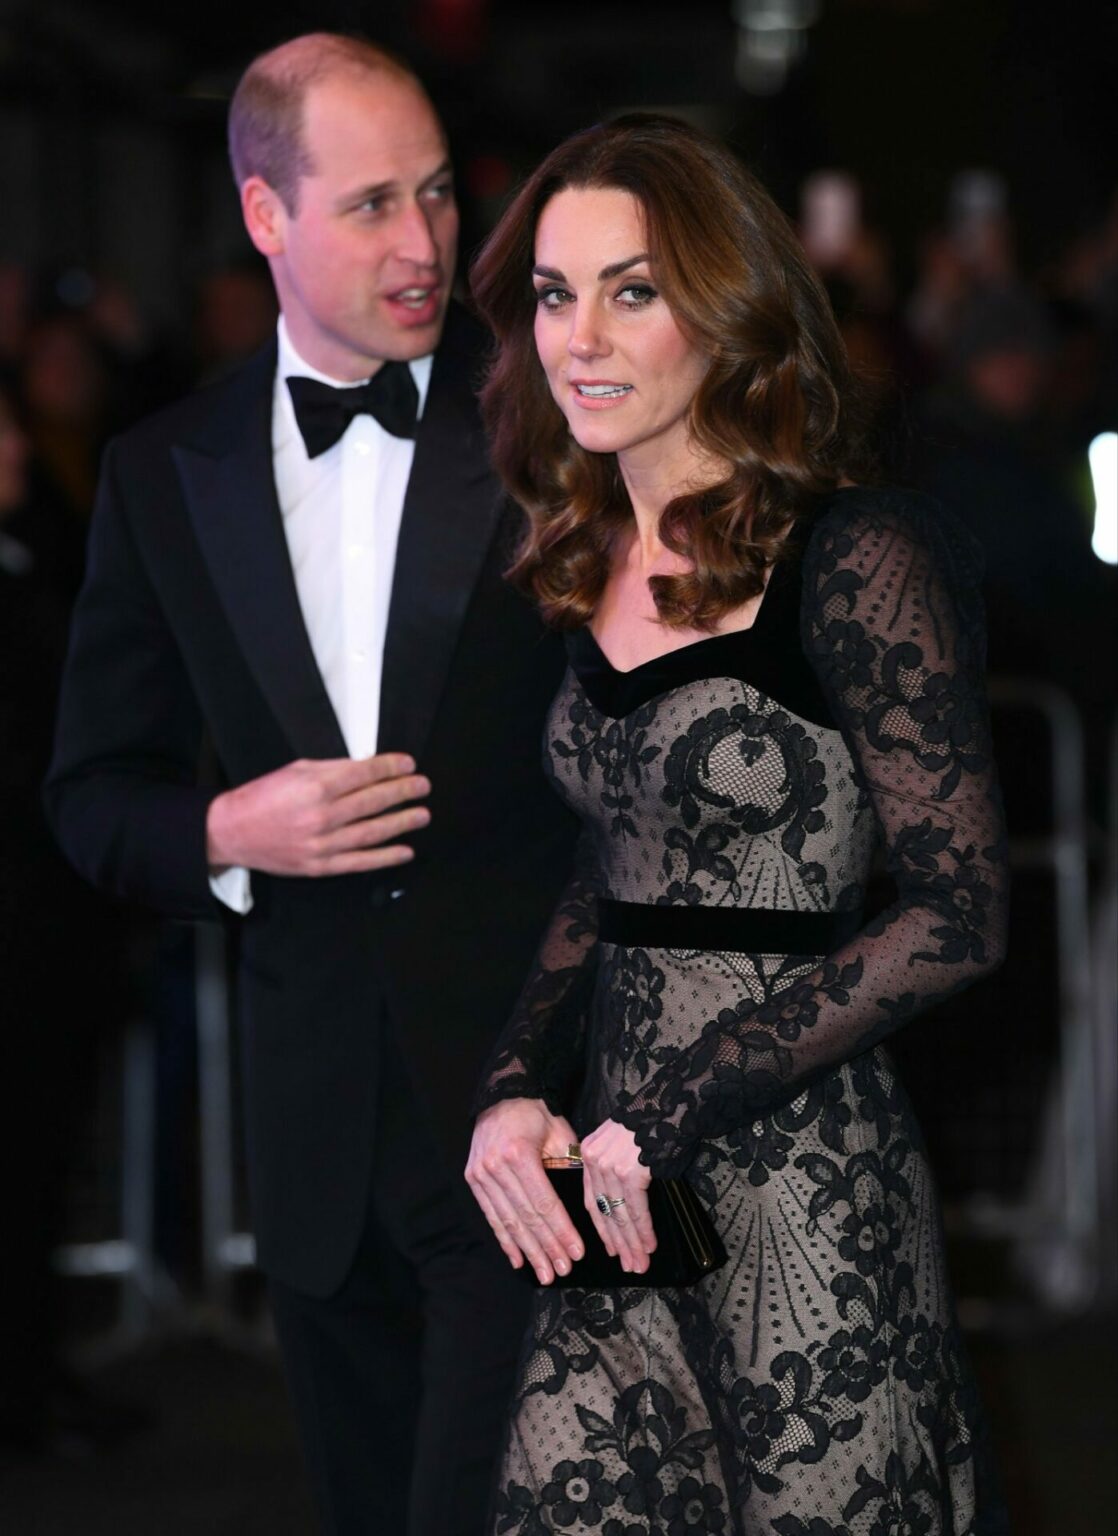 Duchess of Cambridge in Lace Alexander McQueen for Royal Variety ...